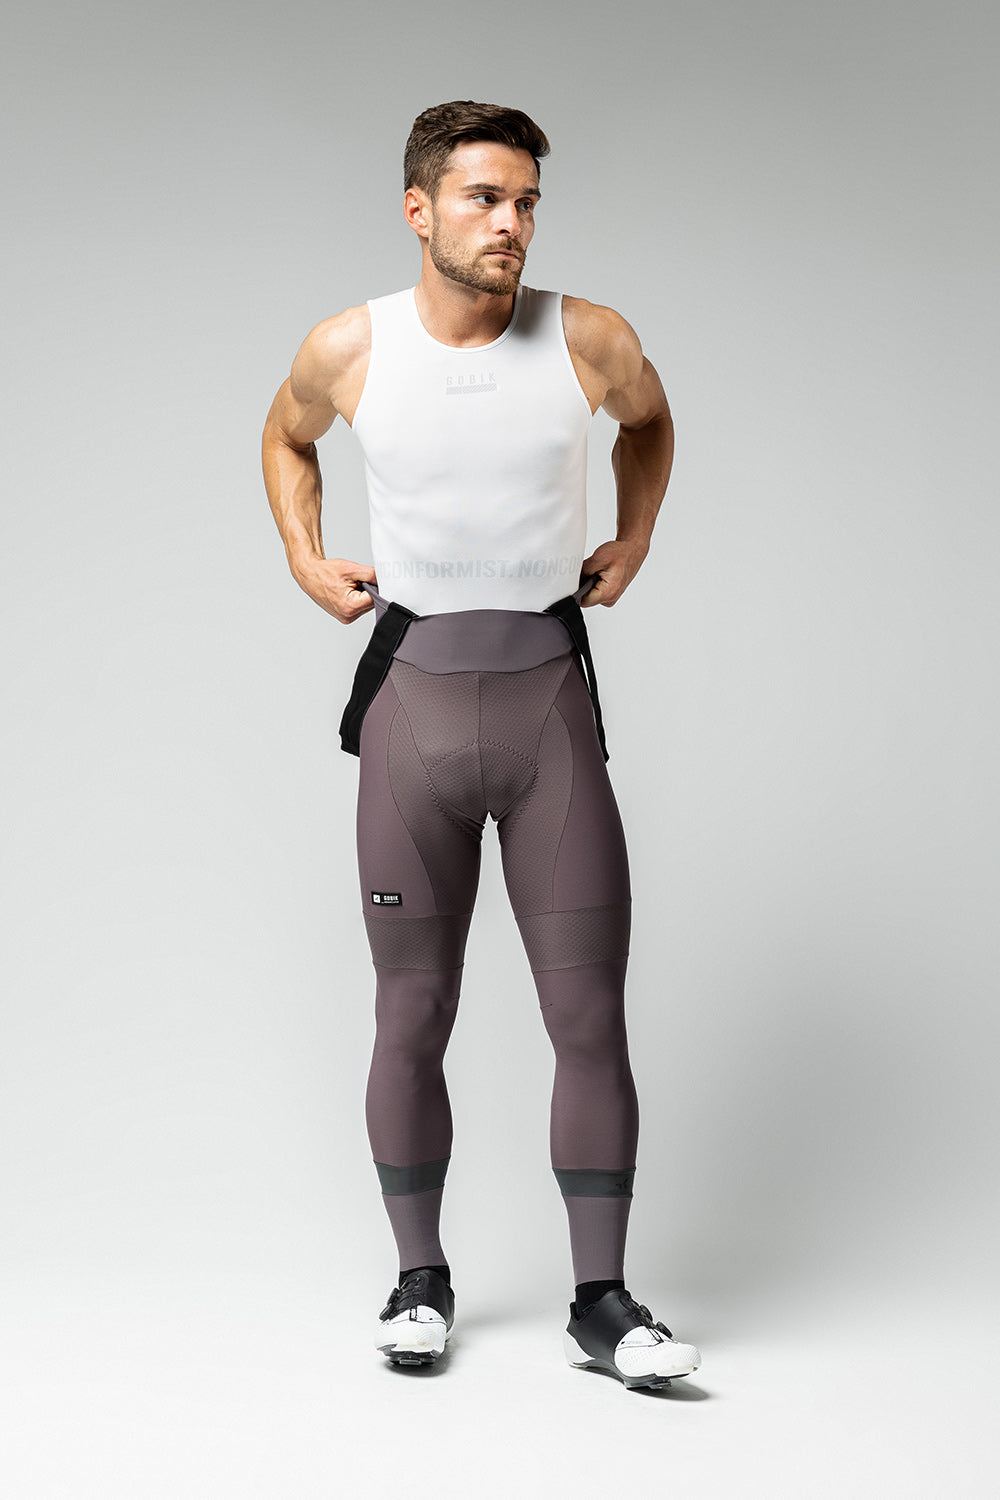 Mens Compression Tights + Top Base Layer Skin Tights Shirt Armour